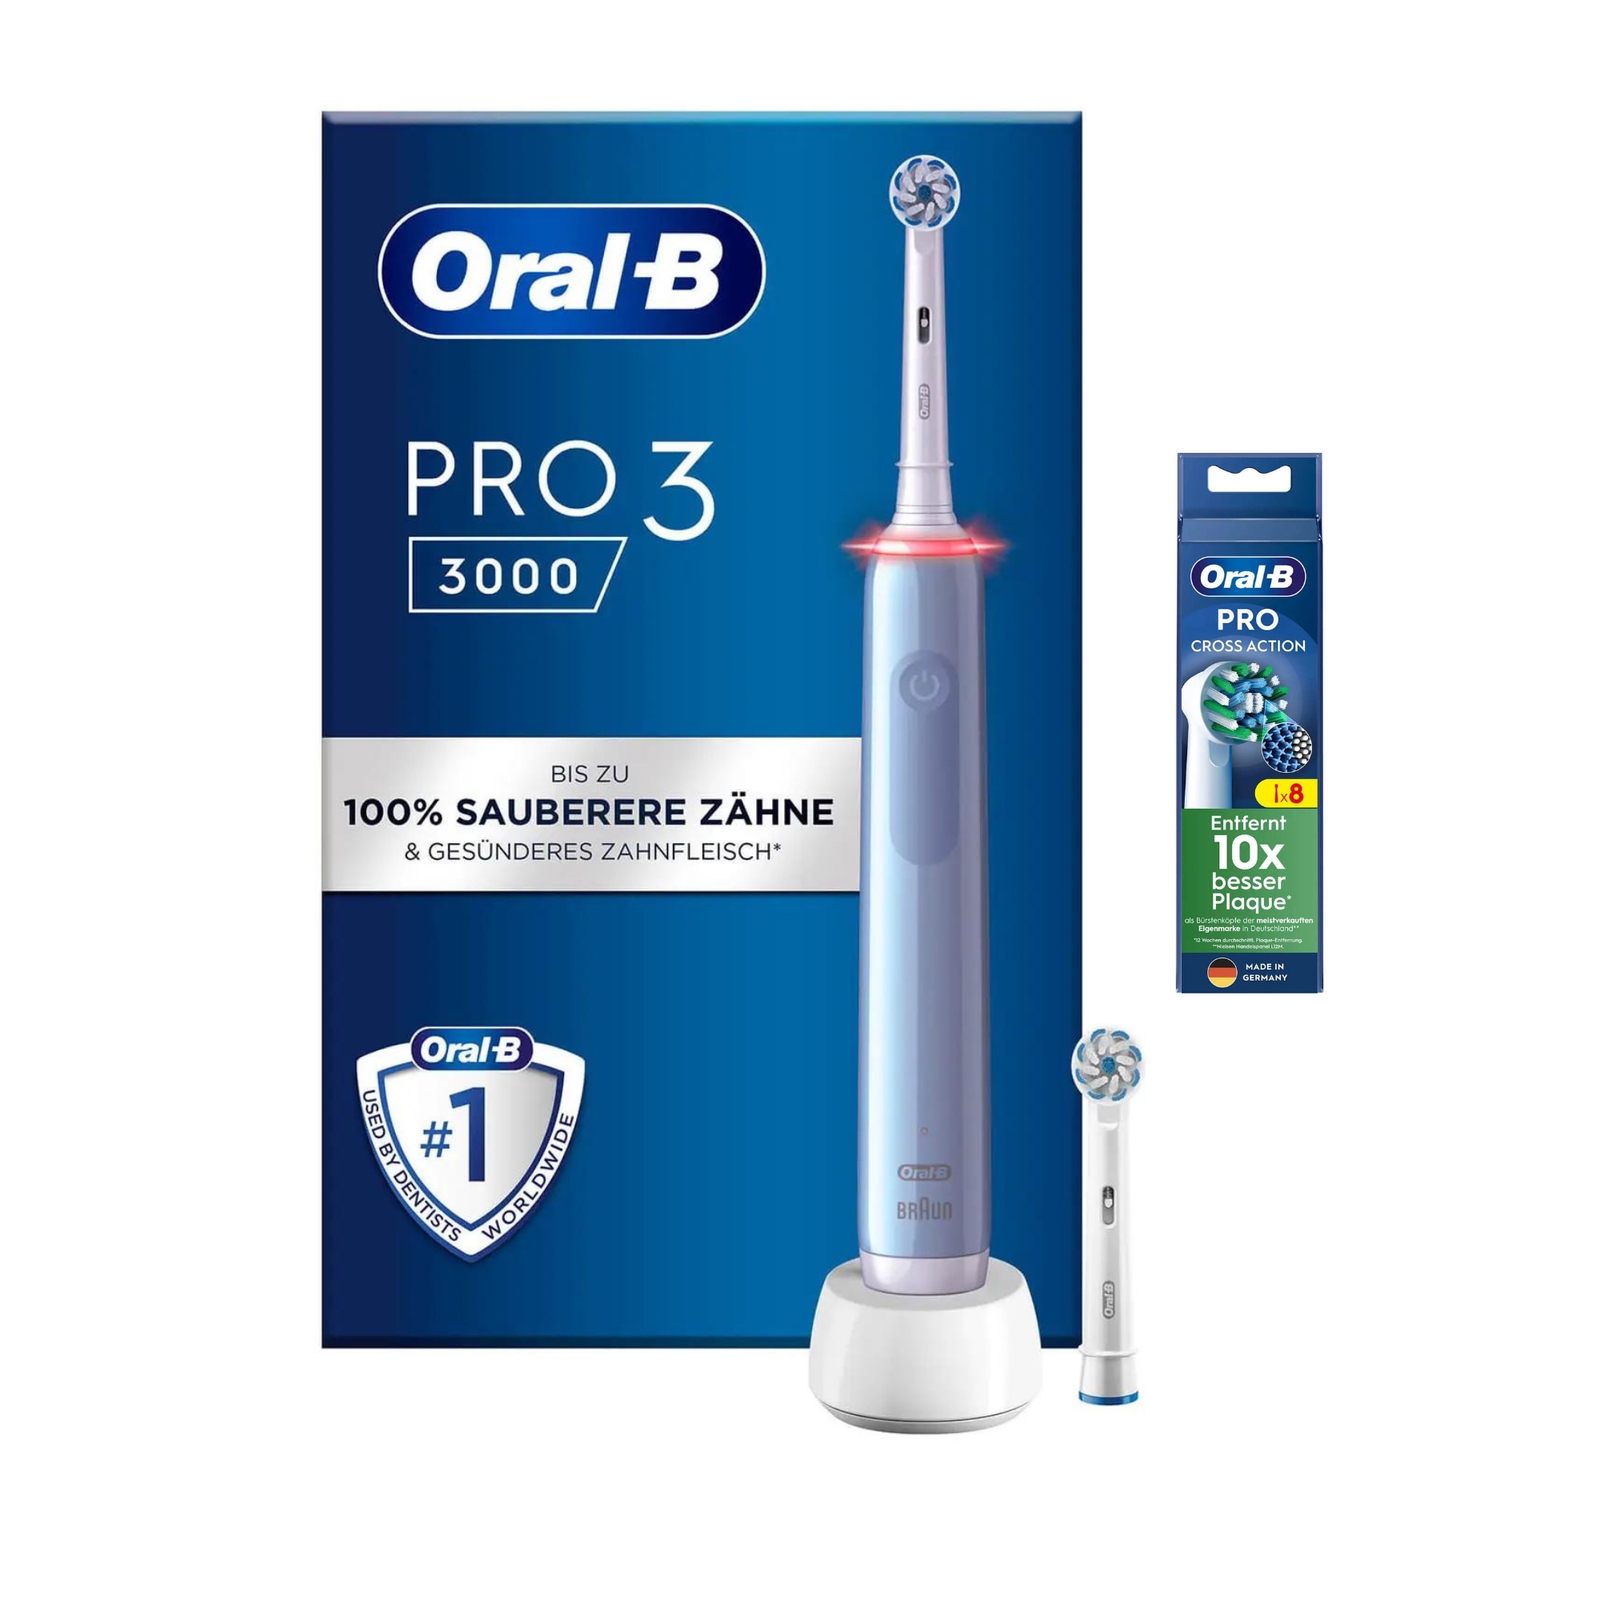 Oral B Power Pro 3 3000 Sensitive Clean Electric Toothbrush Blue - Toothbrush with 8 Brush Heads